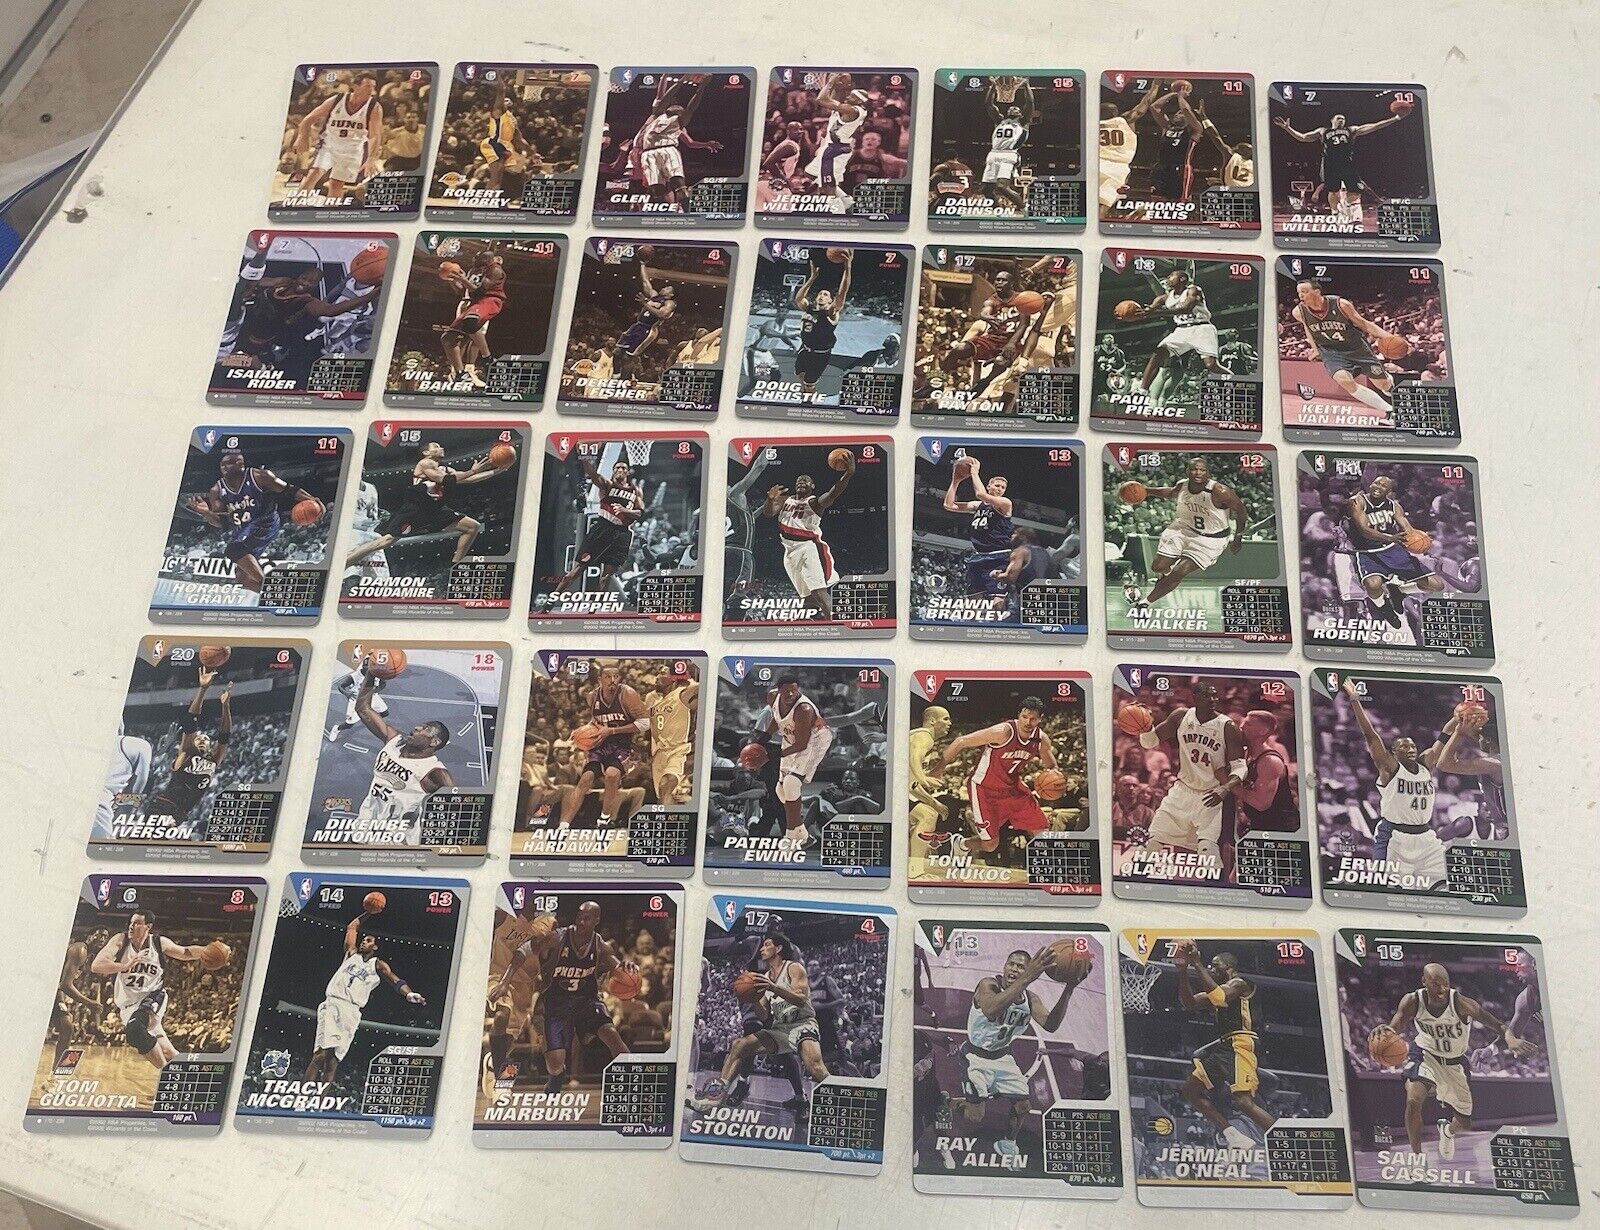 Lotto-2002-NBA-Showdown-Cards-Lot-of-more-than-300-cards-see-PICS-145550400987-9